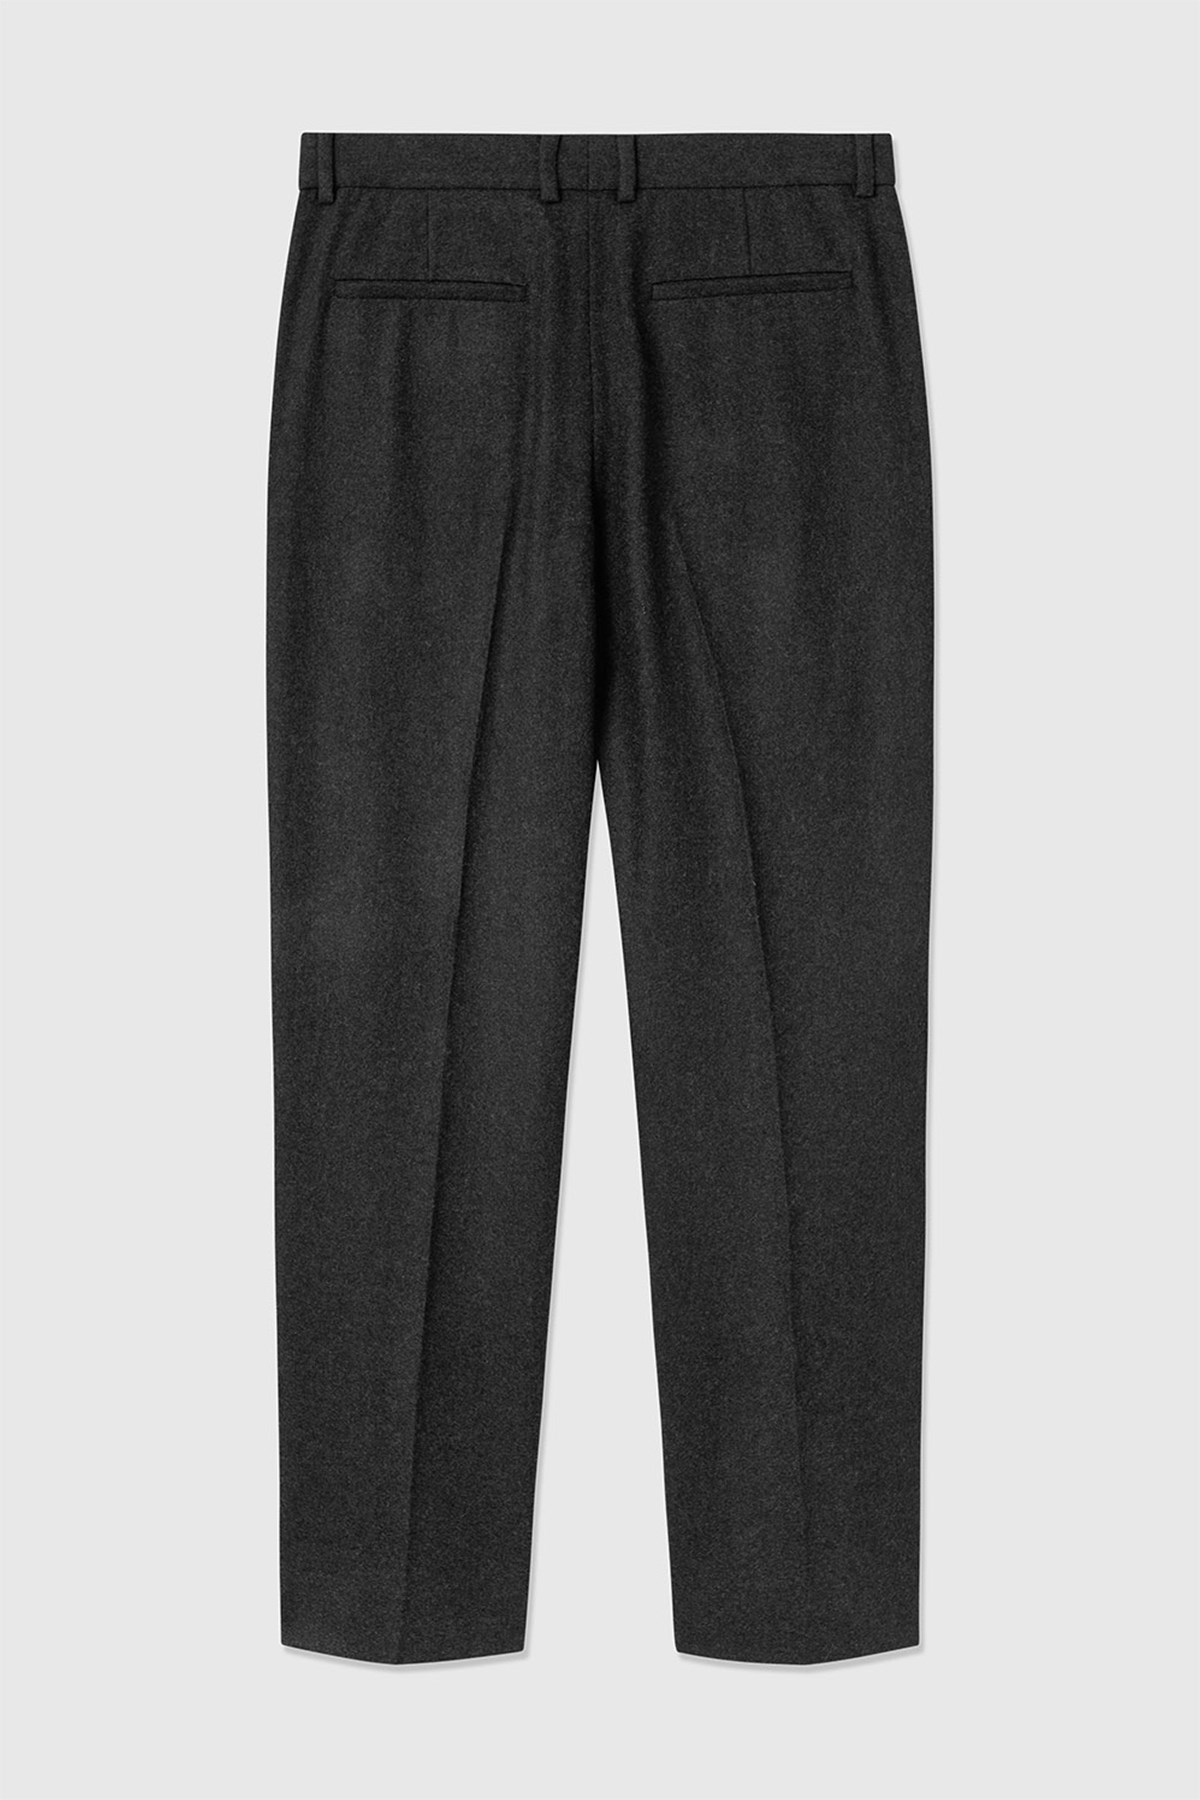 Wood Wood Surrey Recycled Wool Trousers Charcoal  Novoid Plus